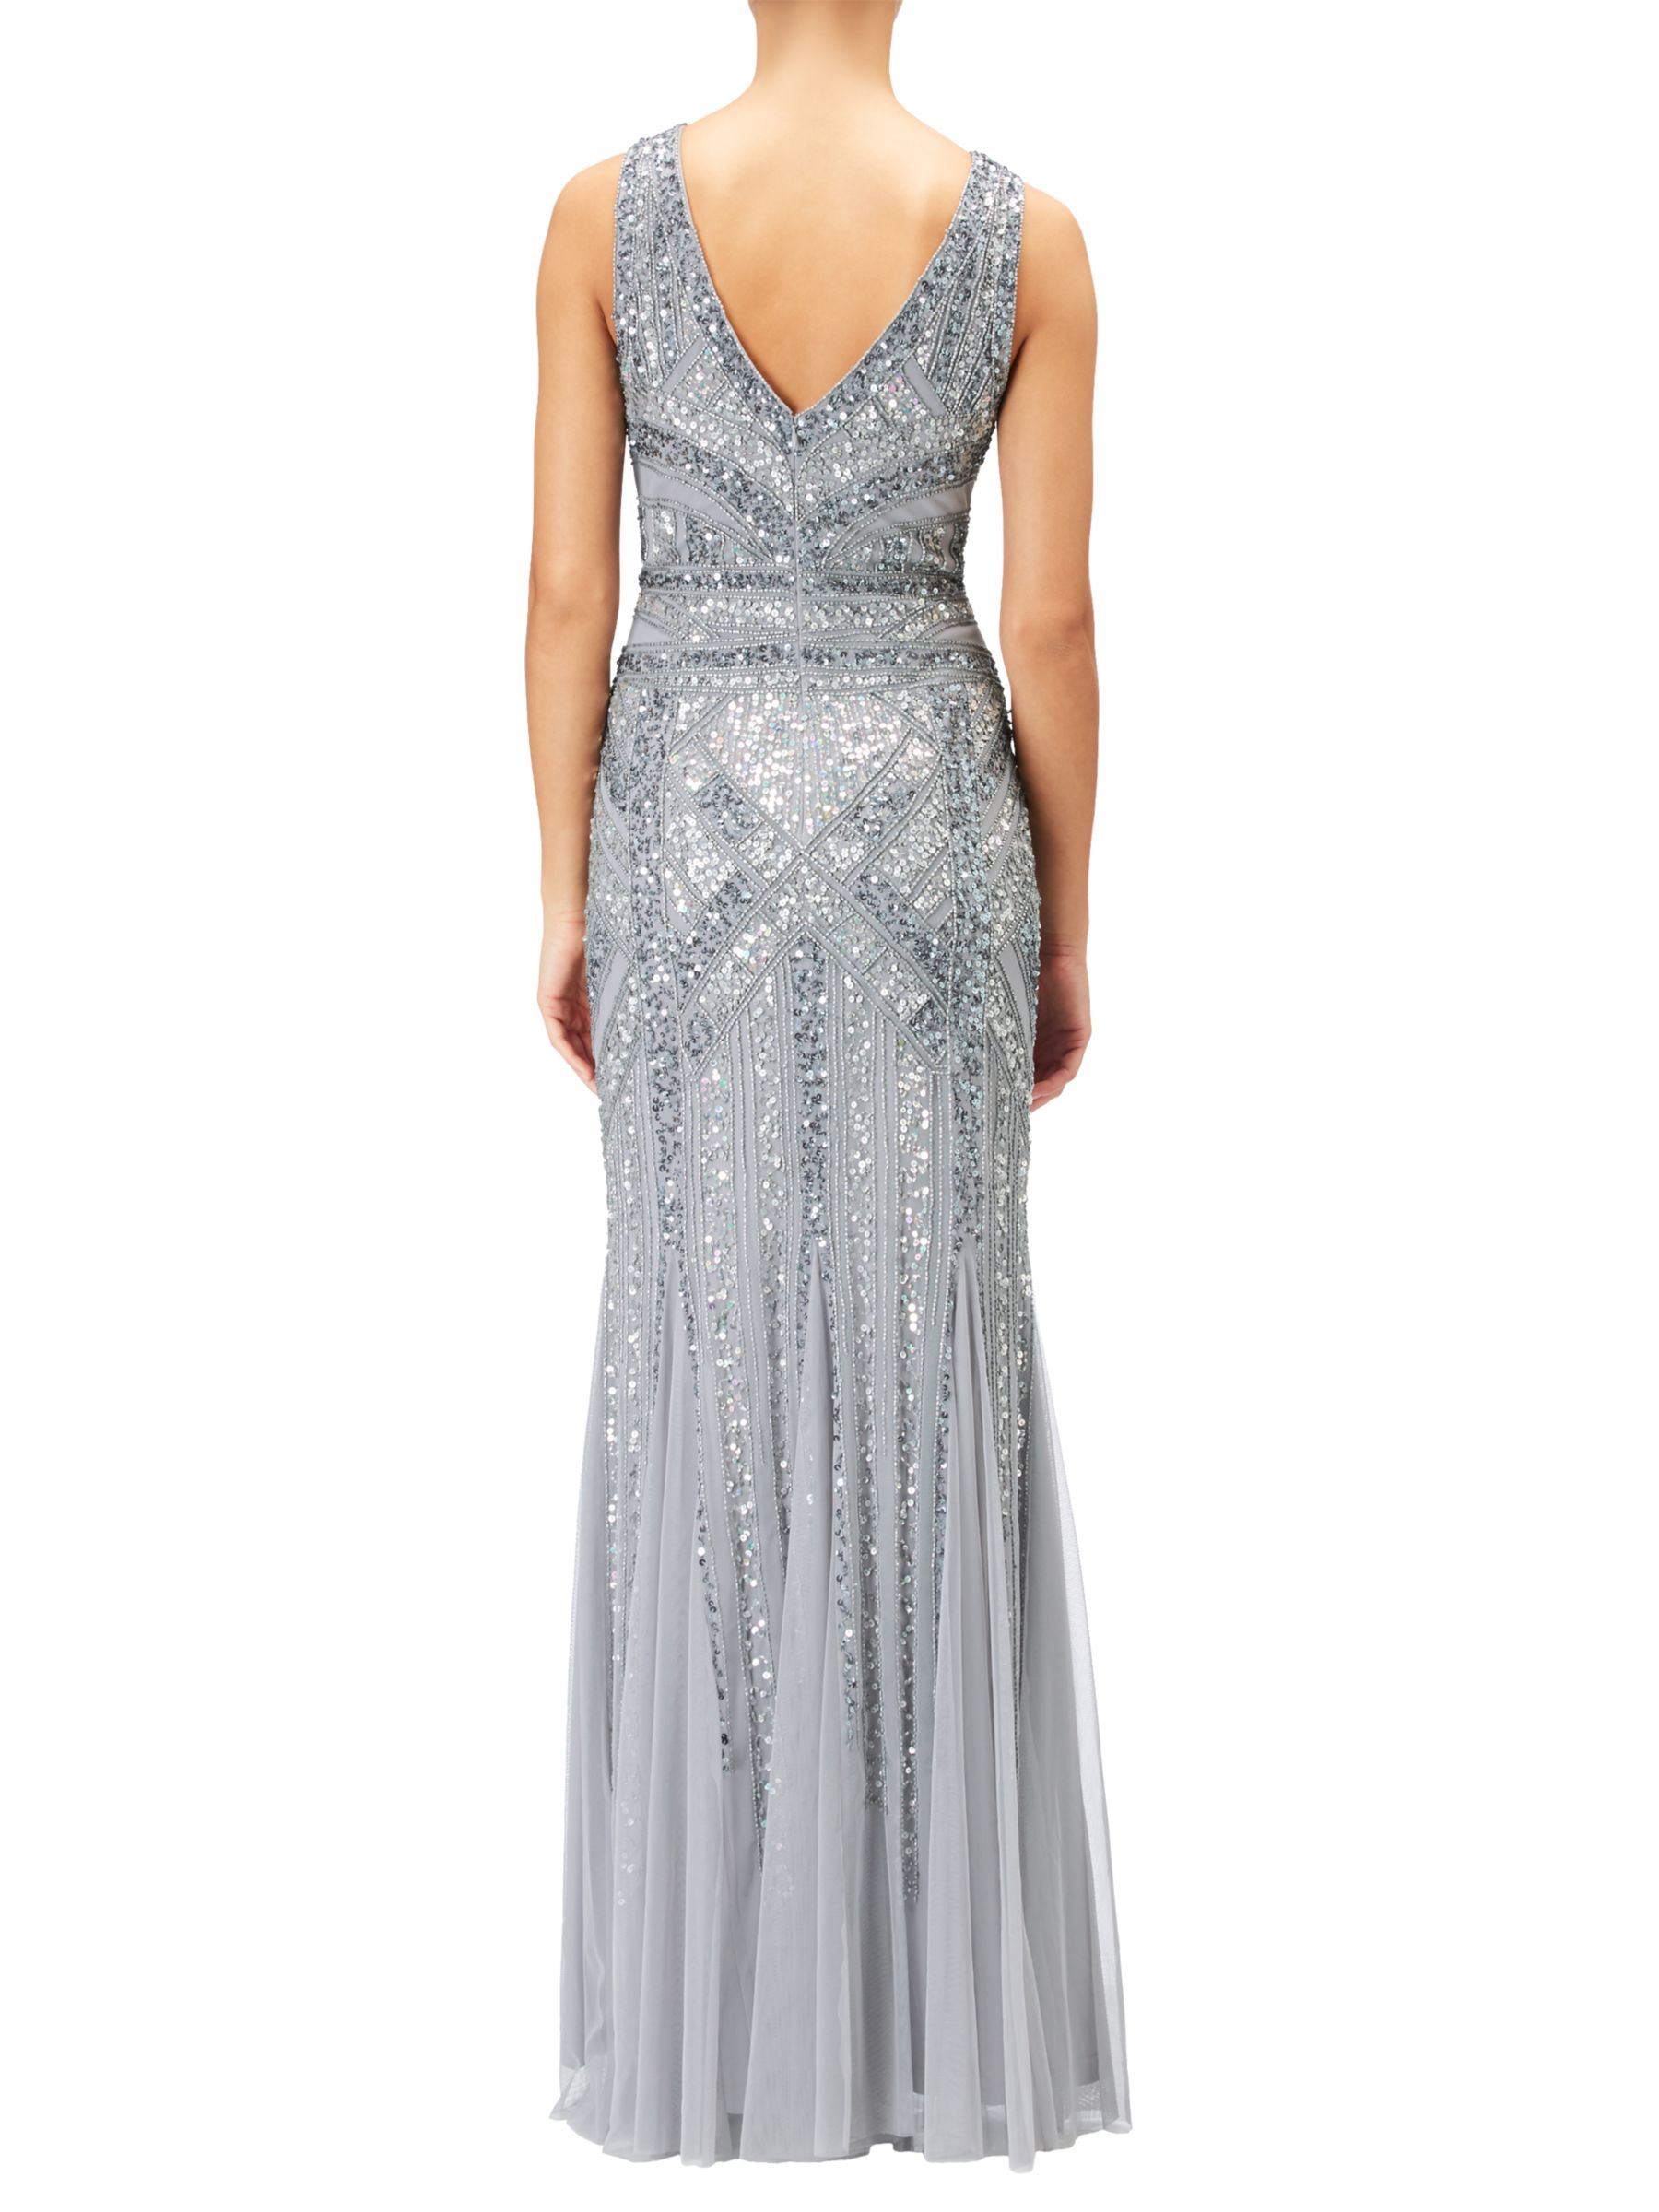 Adrianna Papell Sleeveless Round Neck Beaded Gown, Silver/Grey